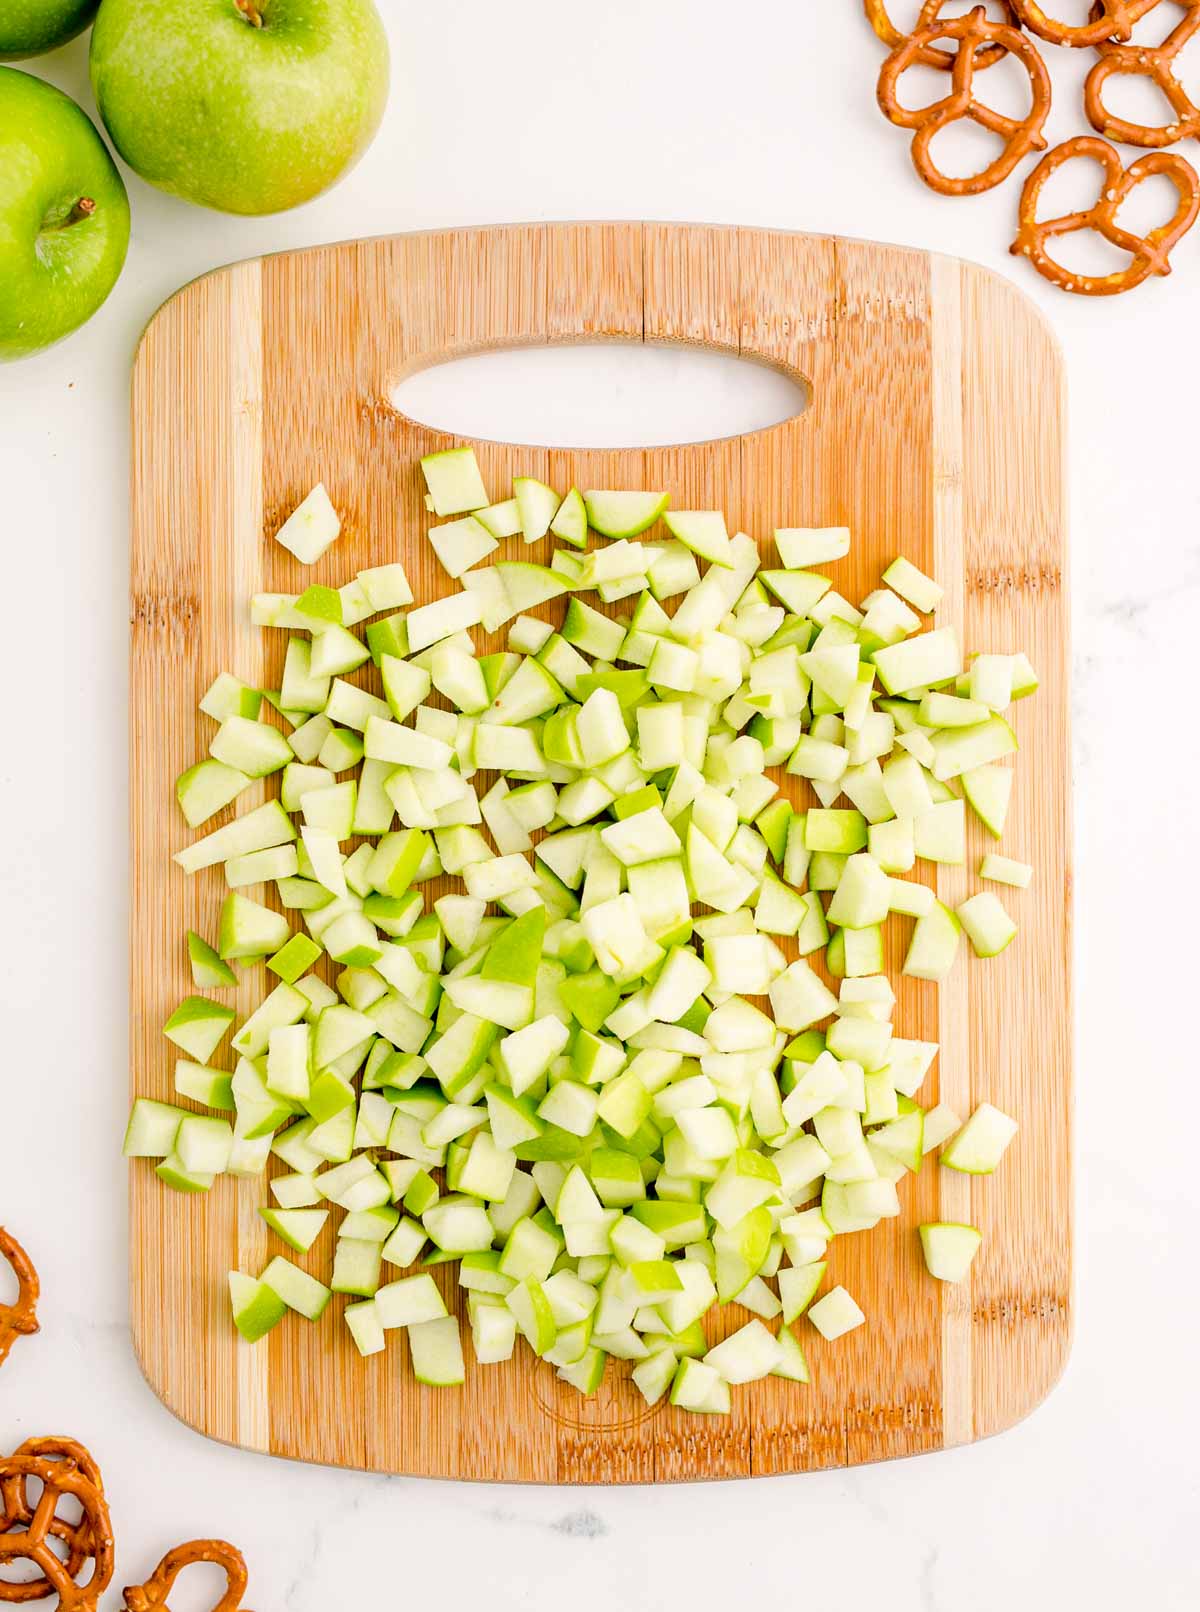 diced green apples on a cutting board